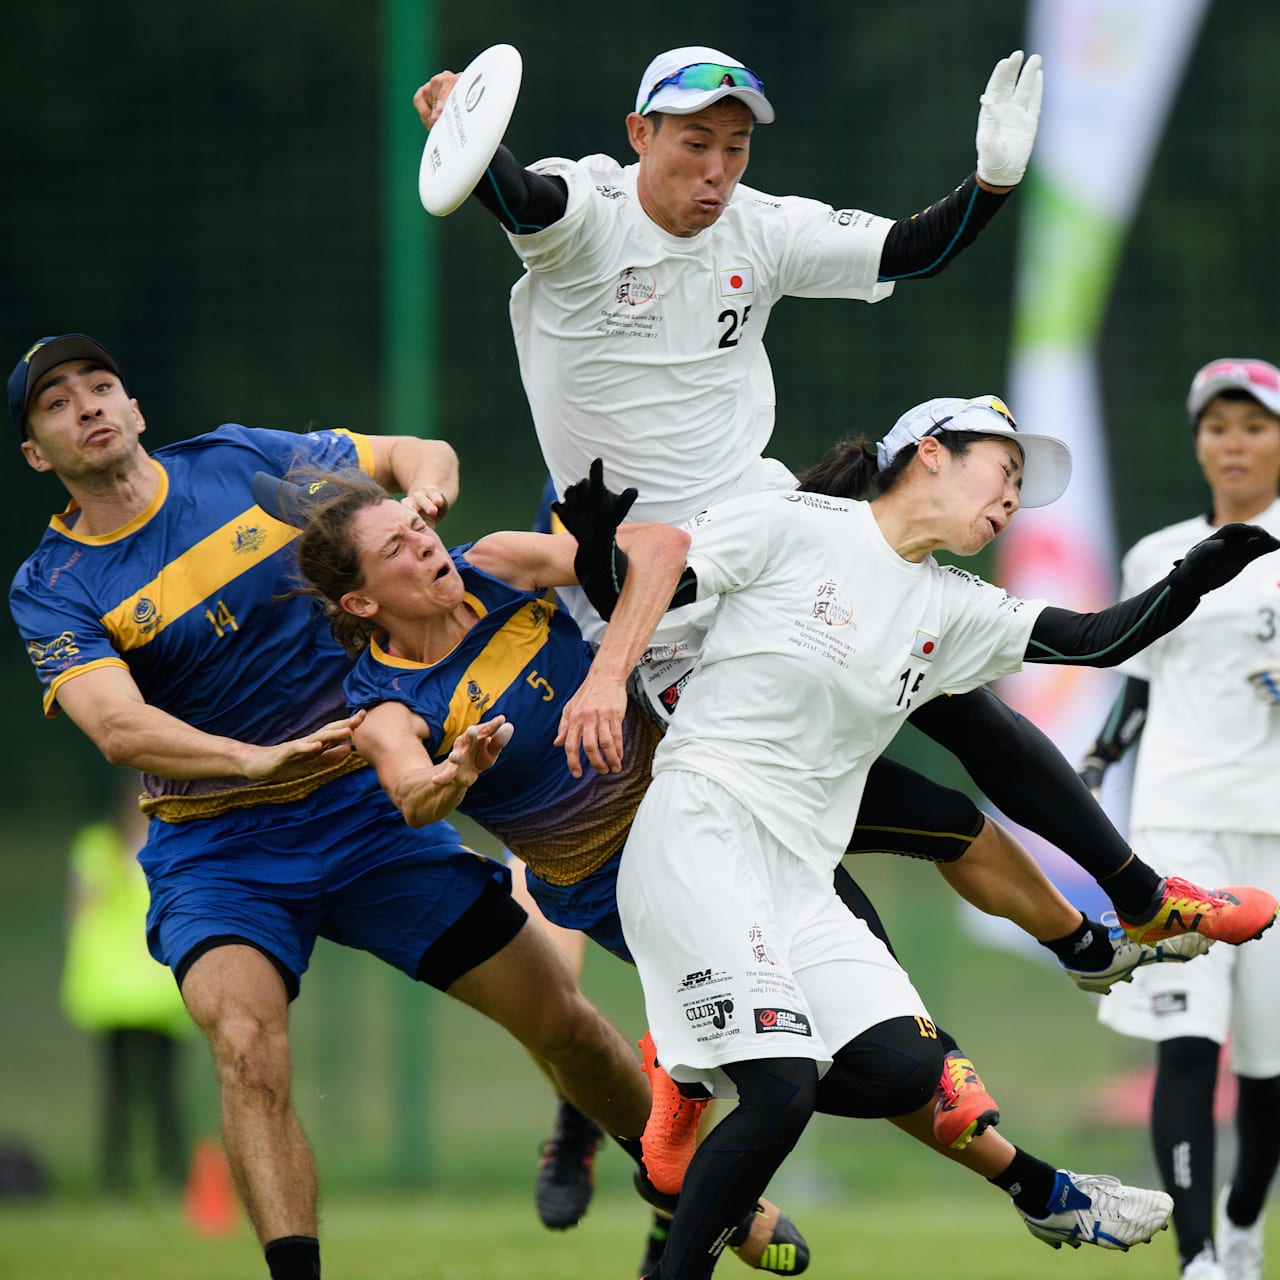 Ultimate Frisbee's Surprising Arrival as a Likely Olympic Sport